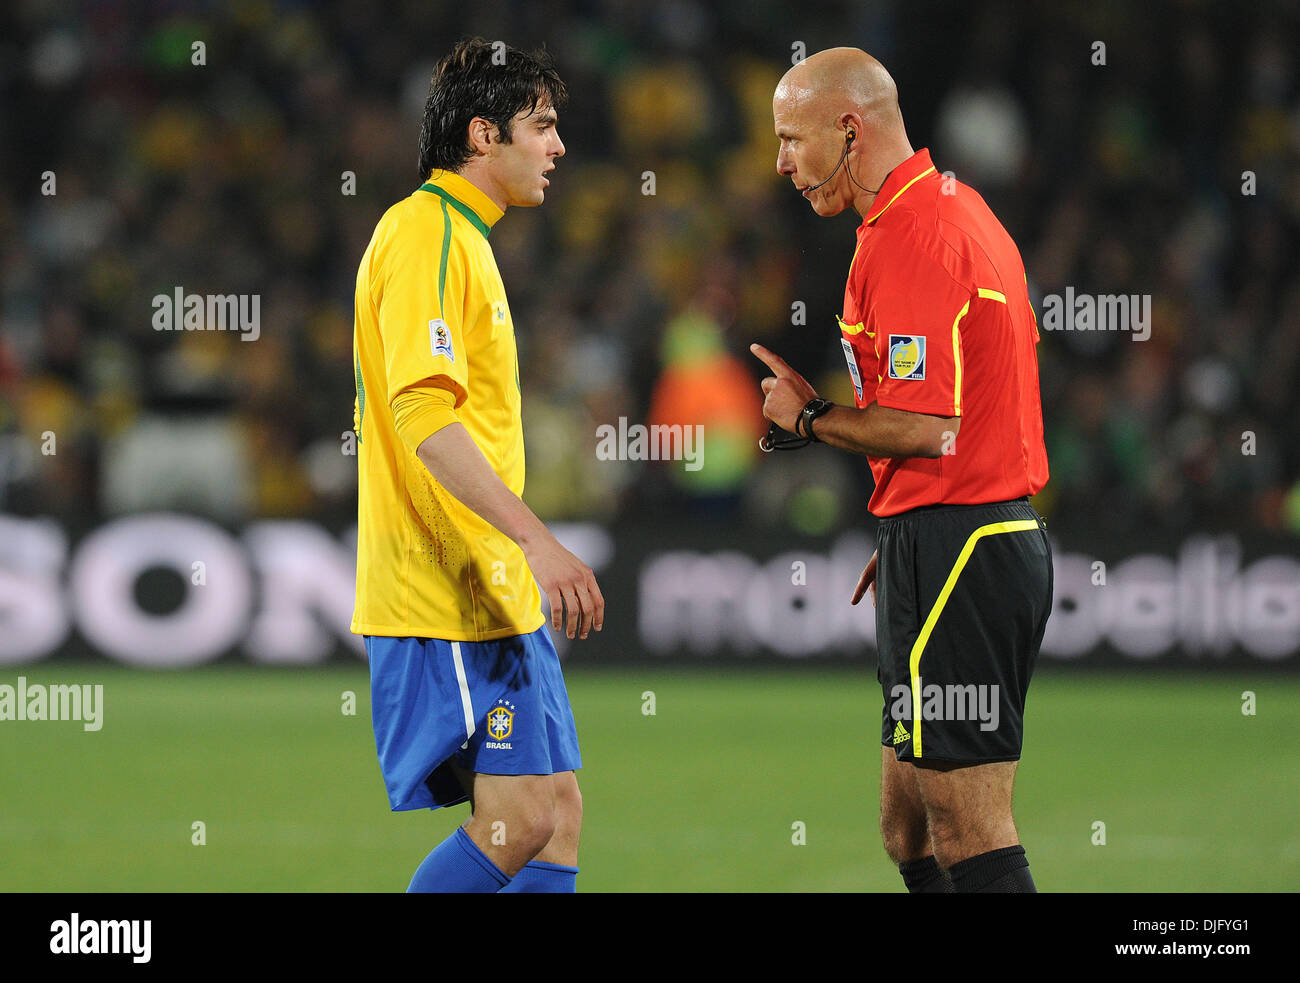 June 28, 2010 - Johannesburg, South Africa - Kaka of Brazil speaks with referee Howard Webb during the 2010 FIFA World Cup soccer match between Brazil and Chile at Ellis Park Stadium on June 28, 2010 in Johannesburg, South Africa. (Credit Image: © Luca Ghidoni/ZUMApress.com) Stock Photo